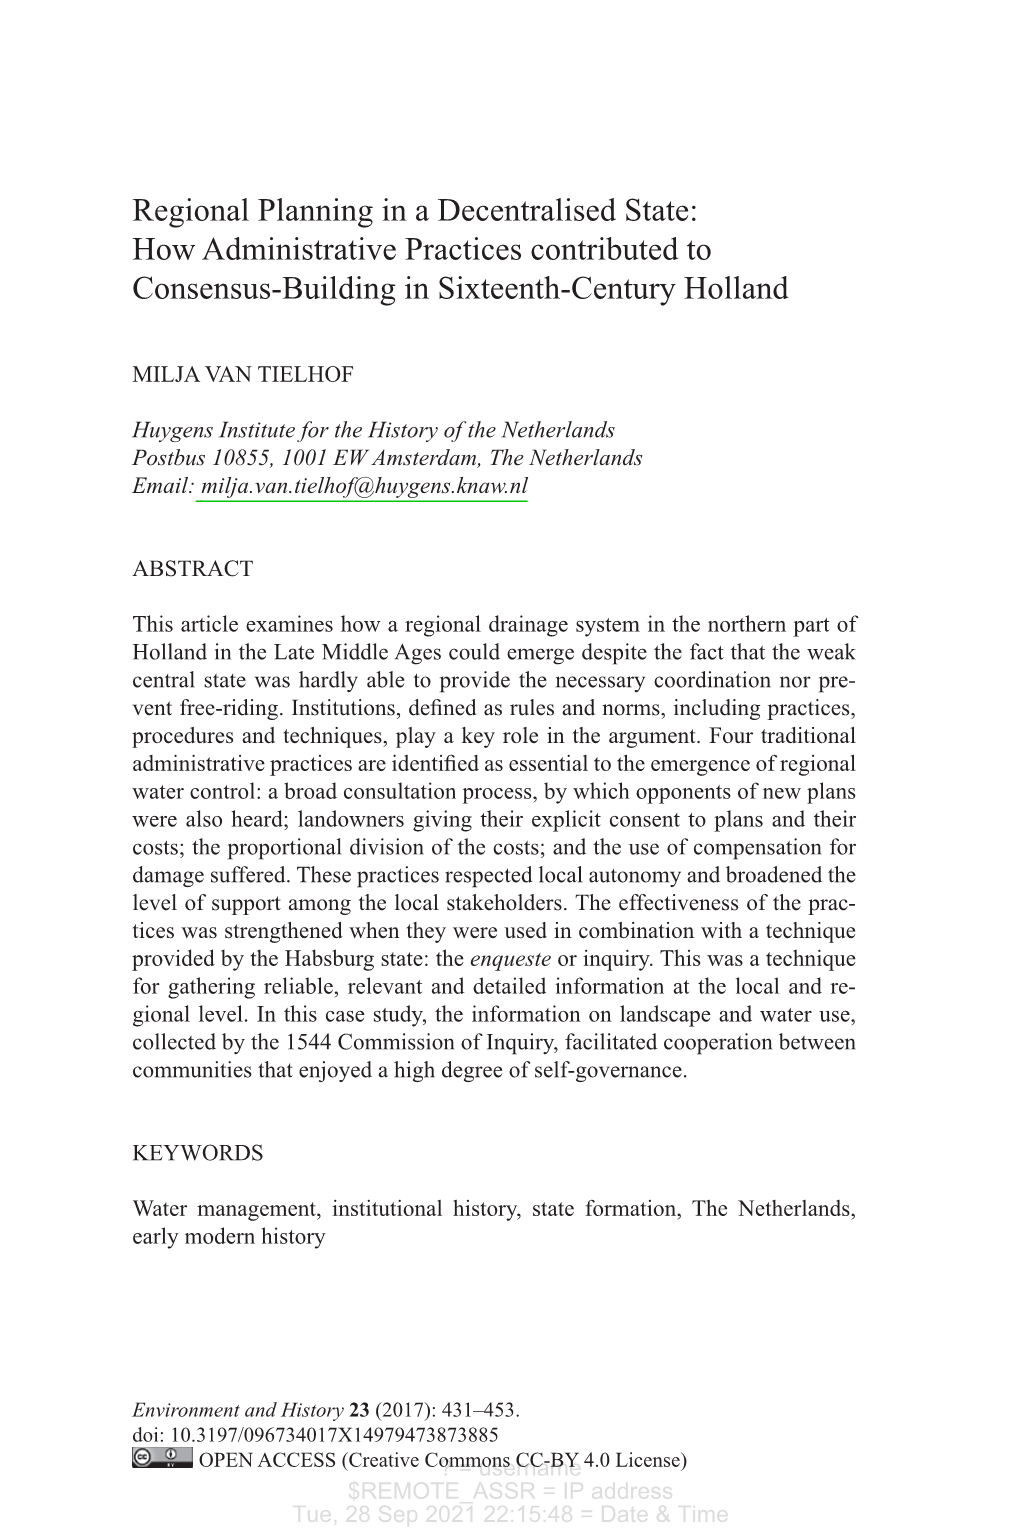 Regional Planning in a Decentralised State: How Administrative Practices Contributed to Consensus-Building in Sixteenth-Century Holland